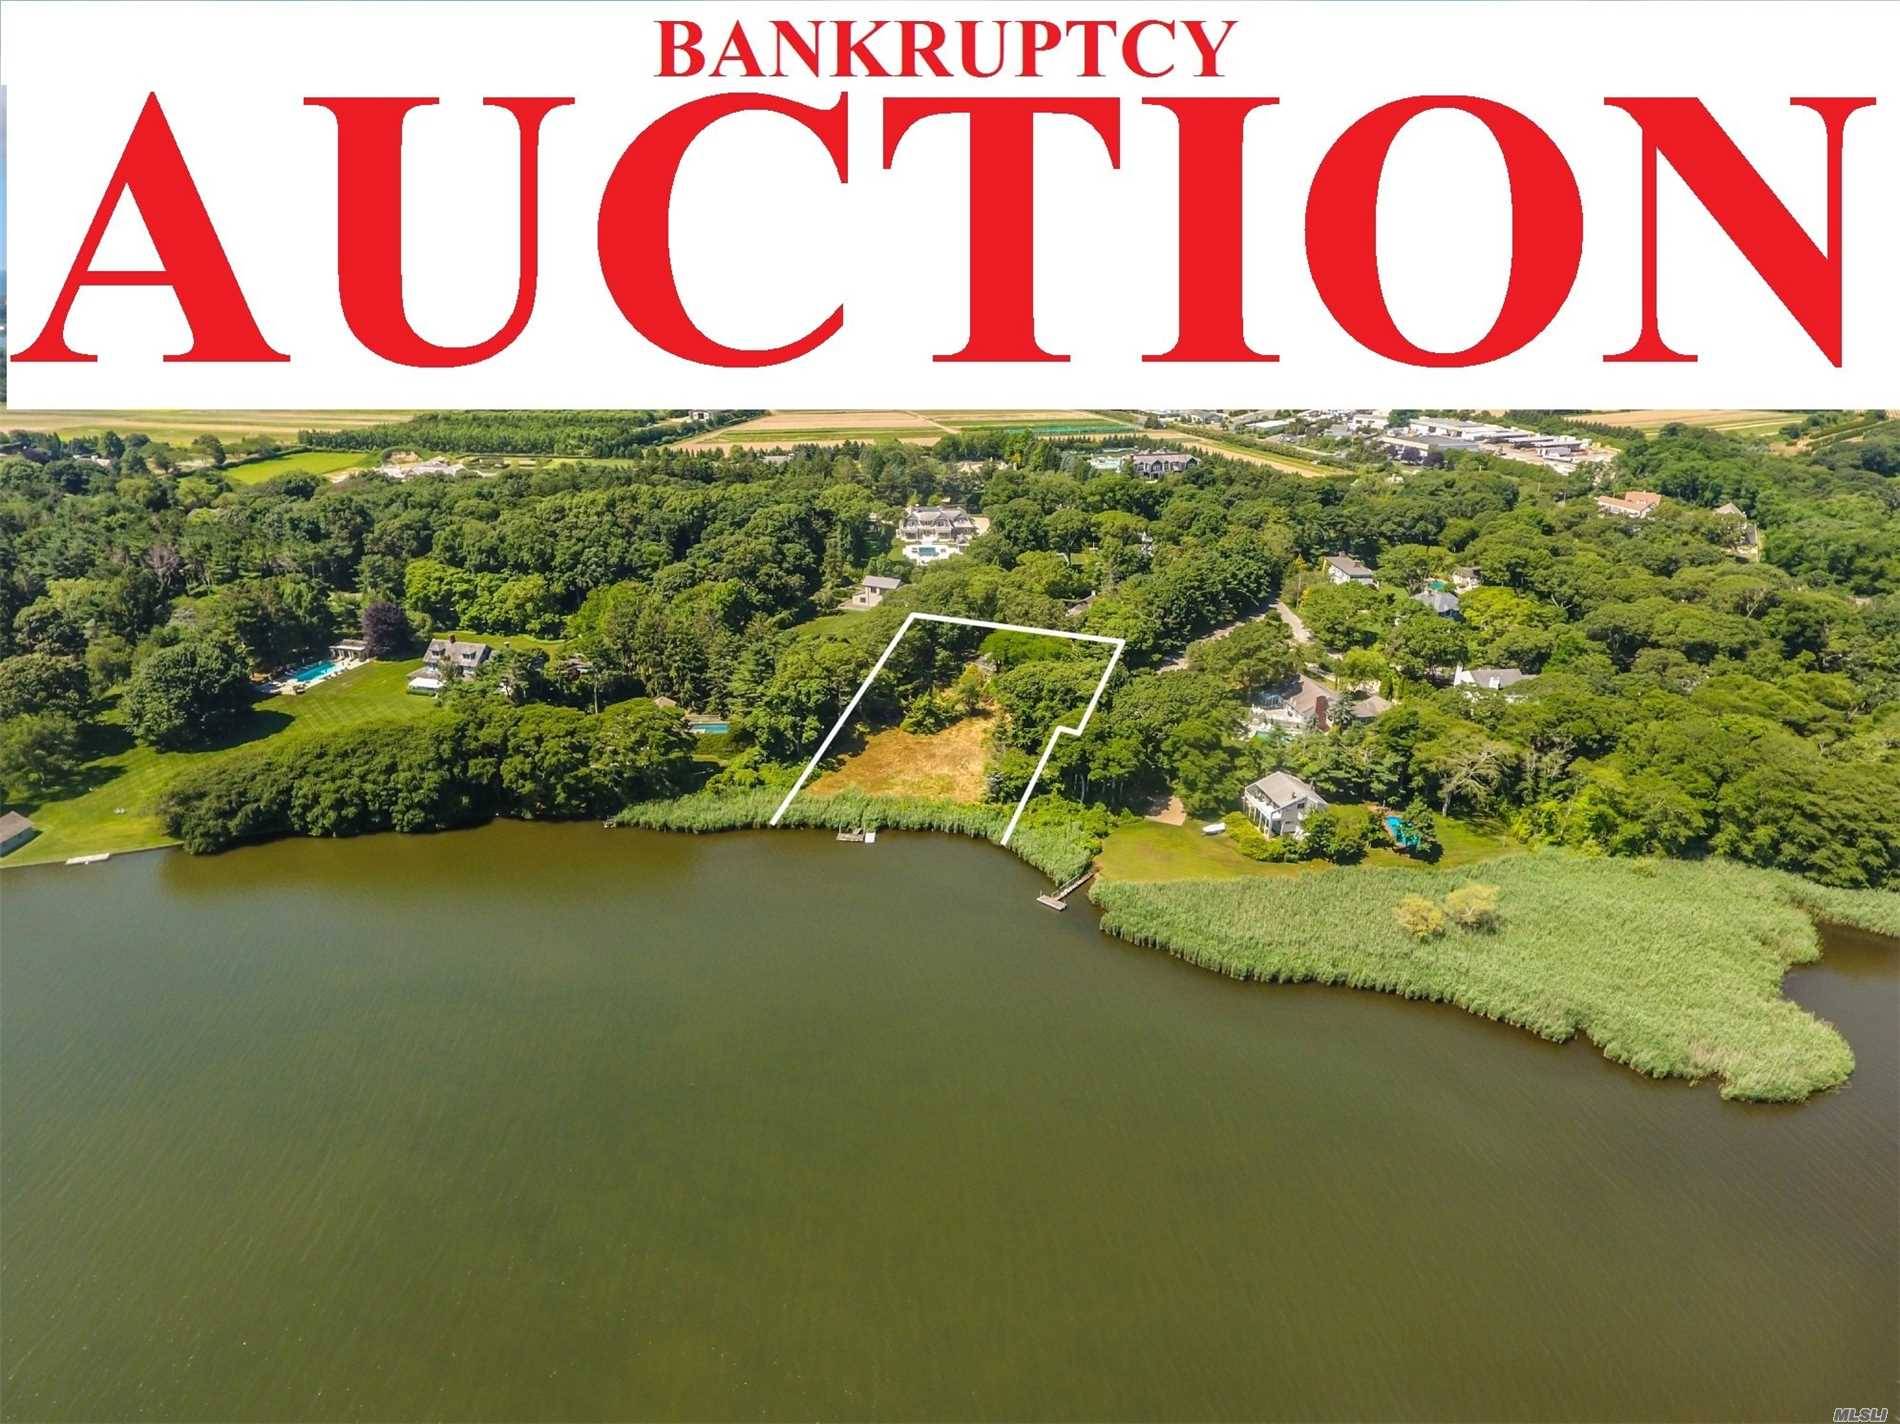 Bankruptcy Auction: September 13th.